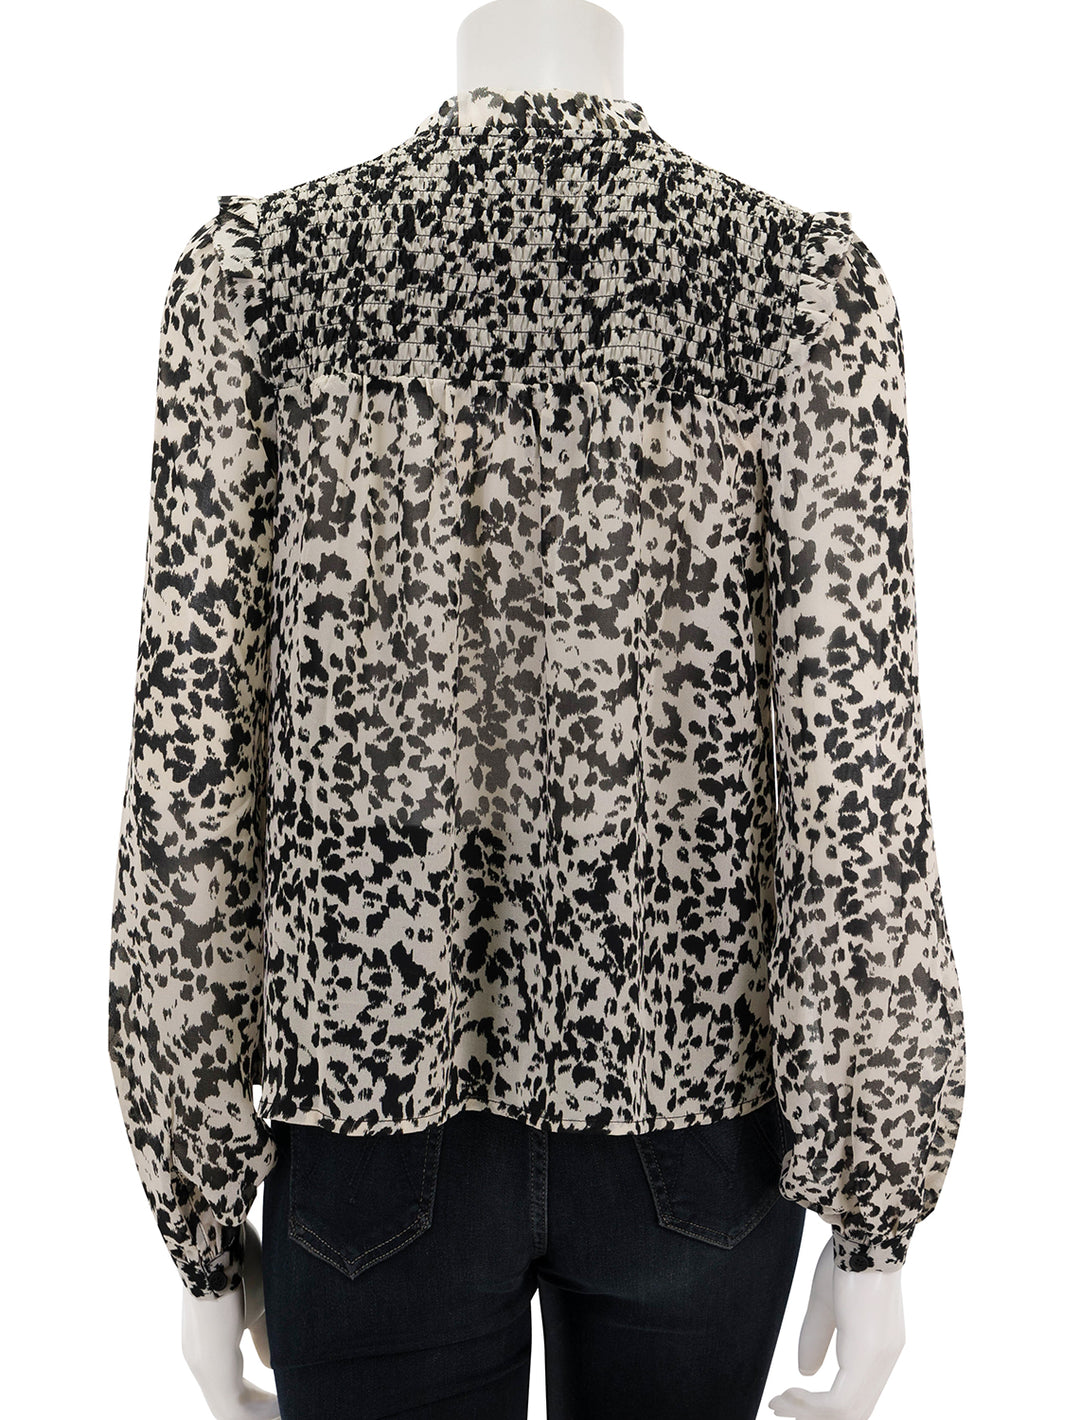 Back view of Steve Madden's drew top in black and ivory floral.